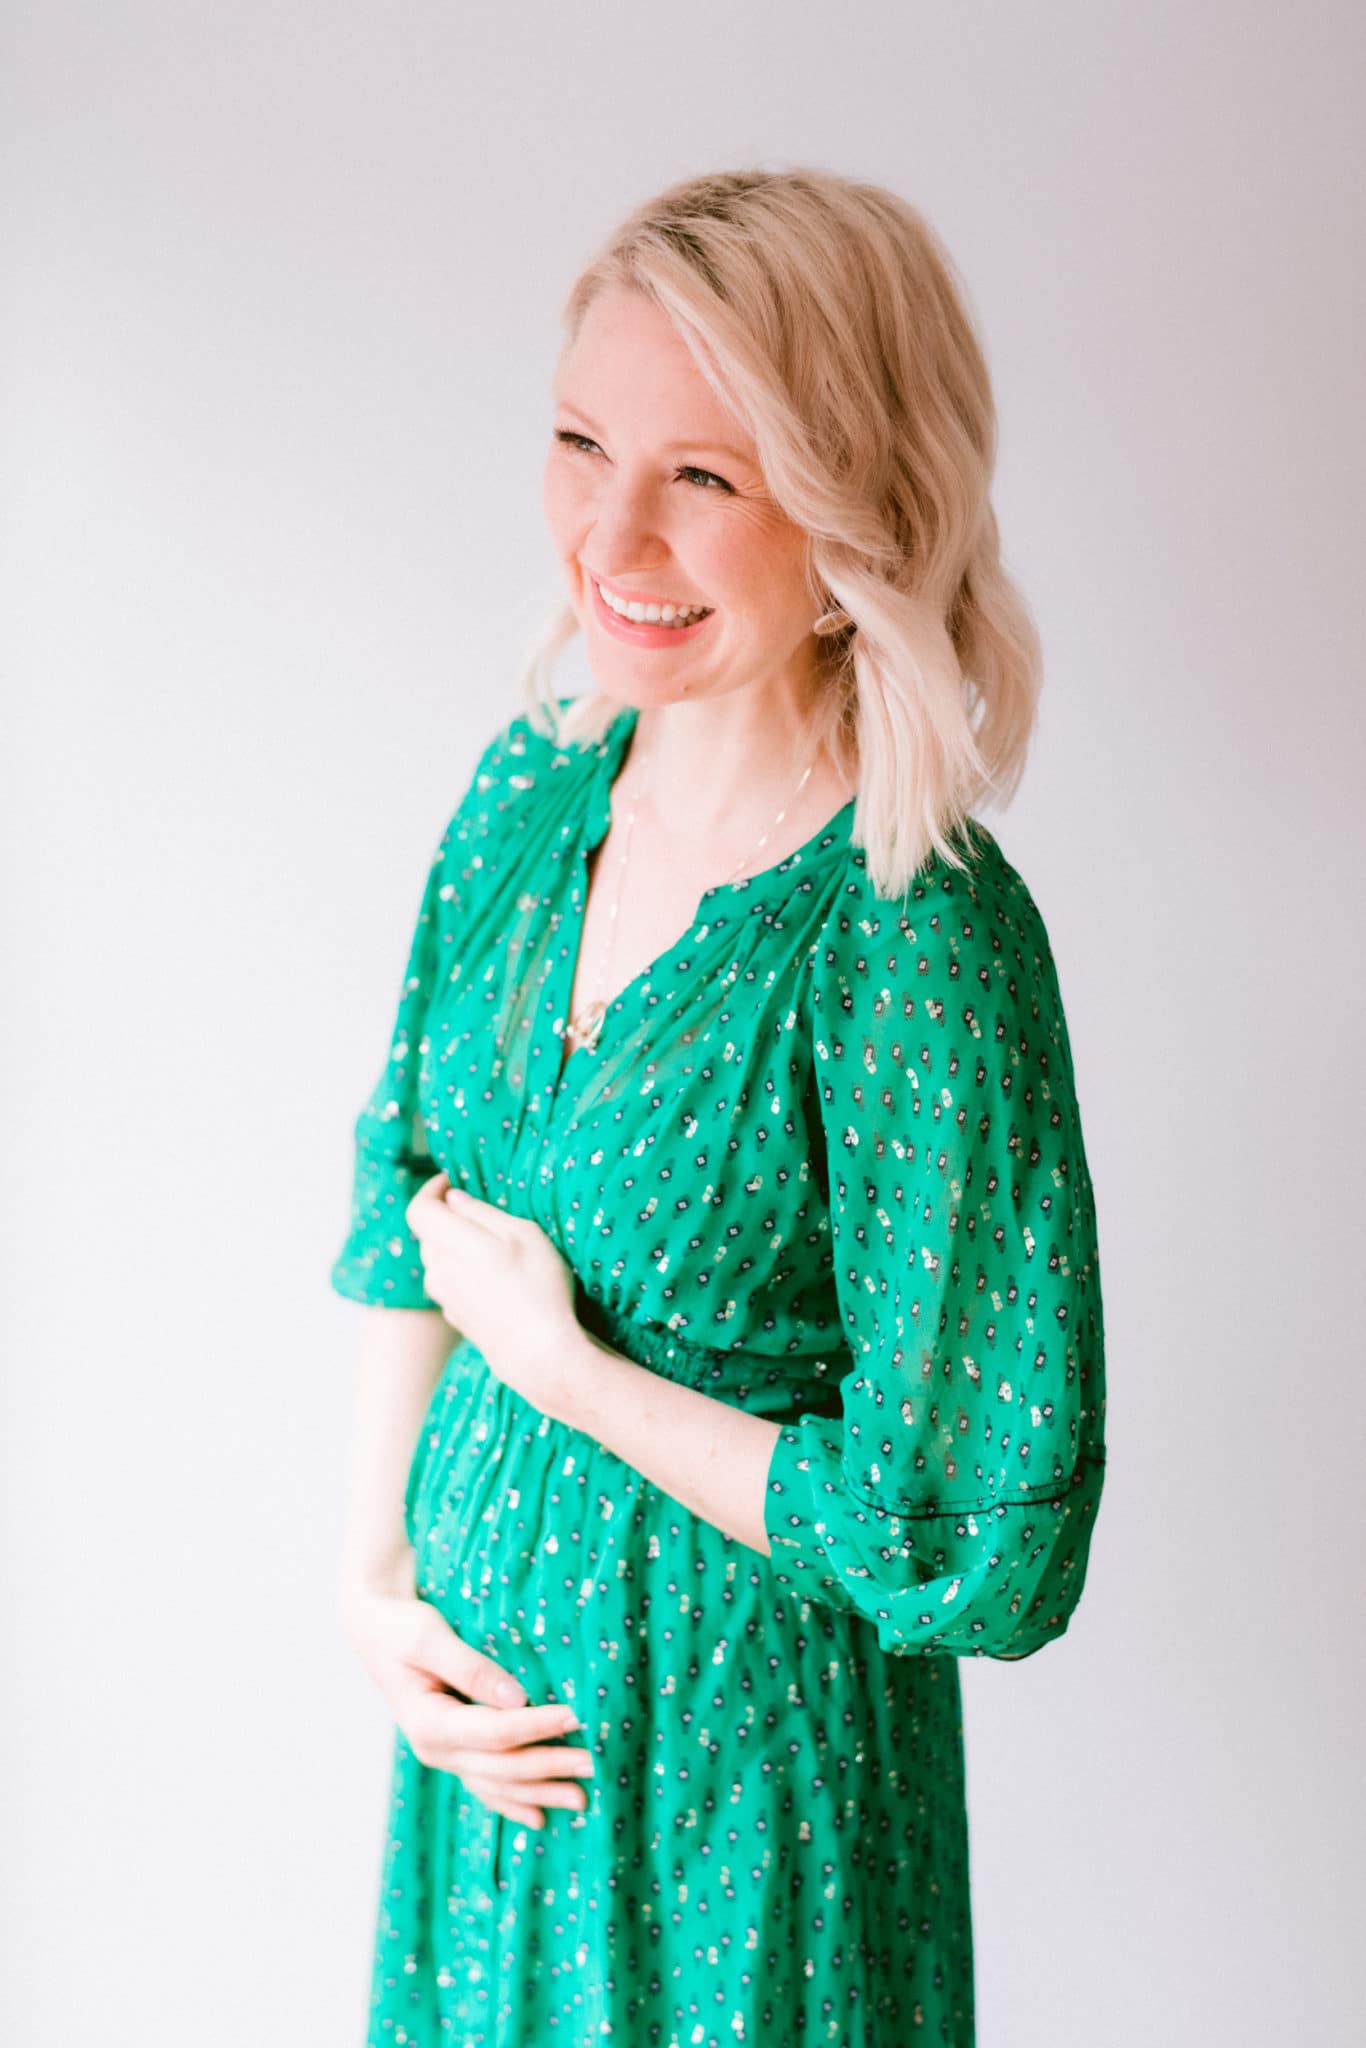 abbey wearing a green dress and showing her baby bump